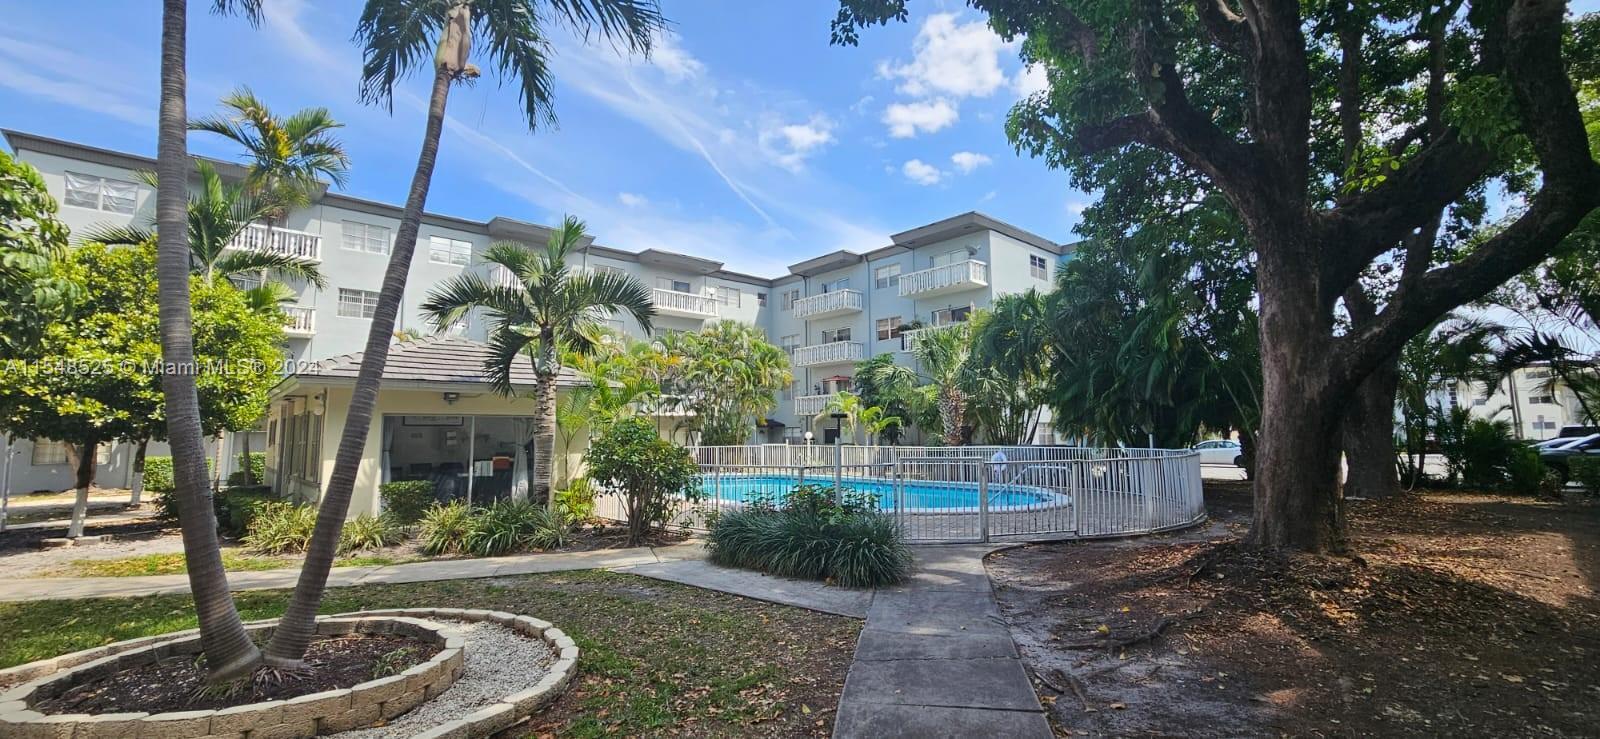 Photo of 3501 Jackson St #302 in Hollywood, FL